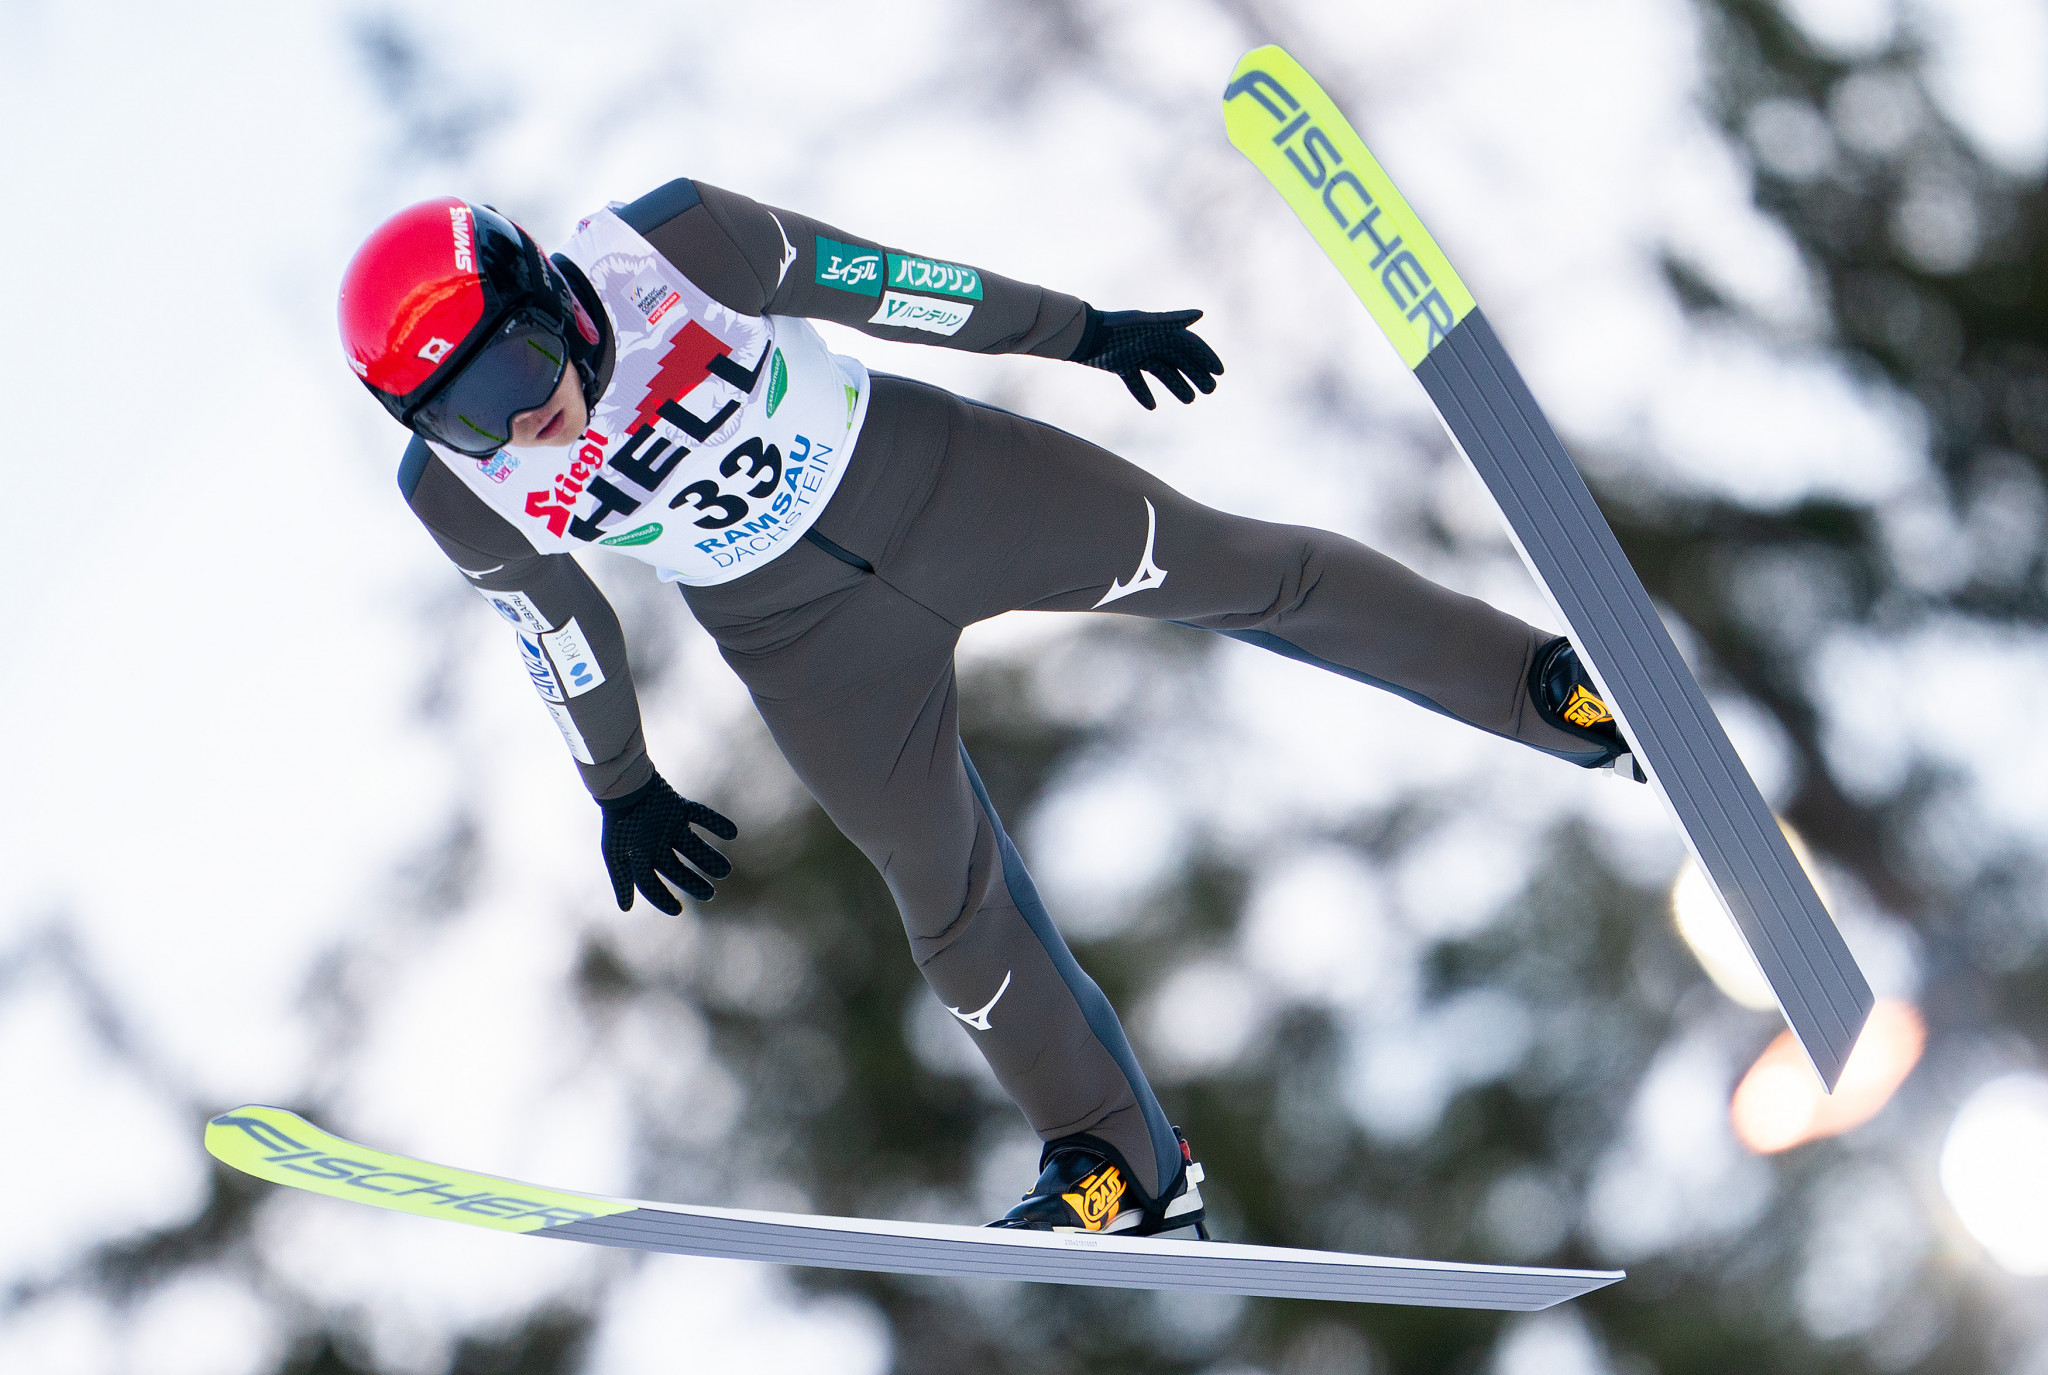 Japanese duo Yamamoto and Watabe in top three of Nordic Combined World Cup qualifying in Lahti